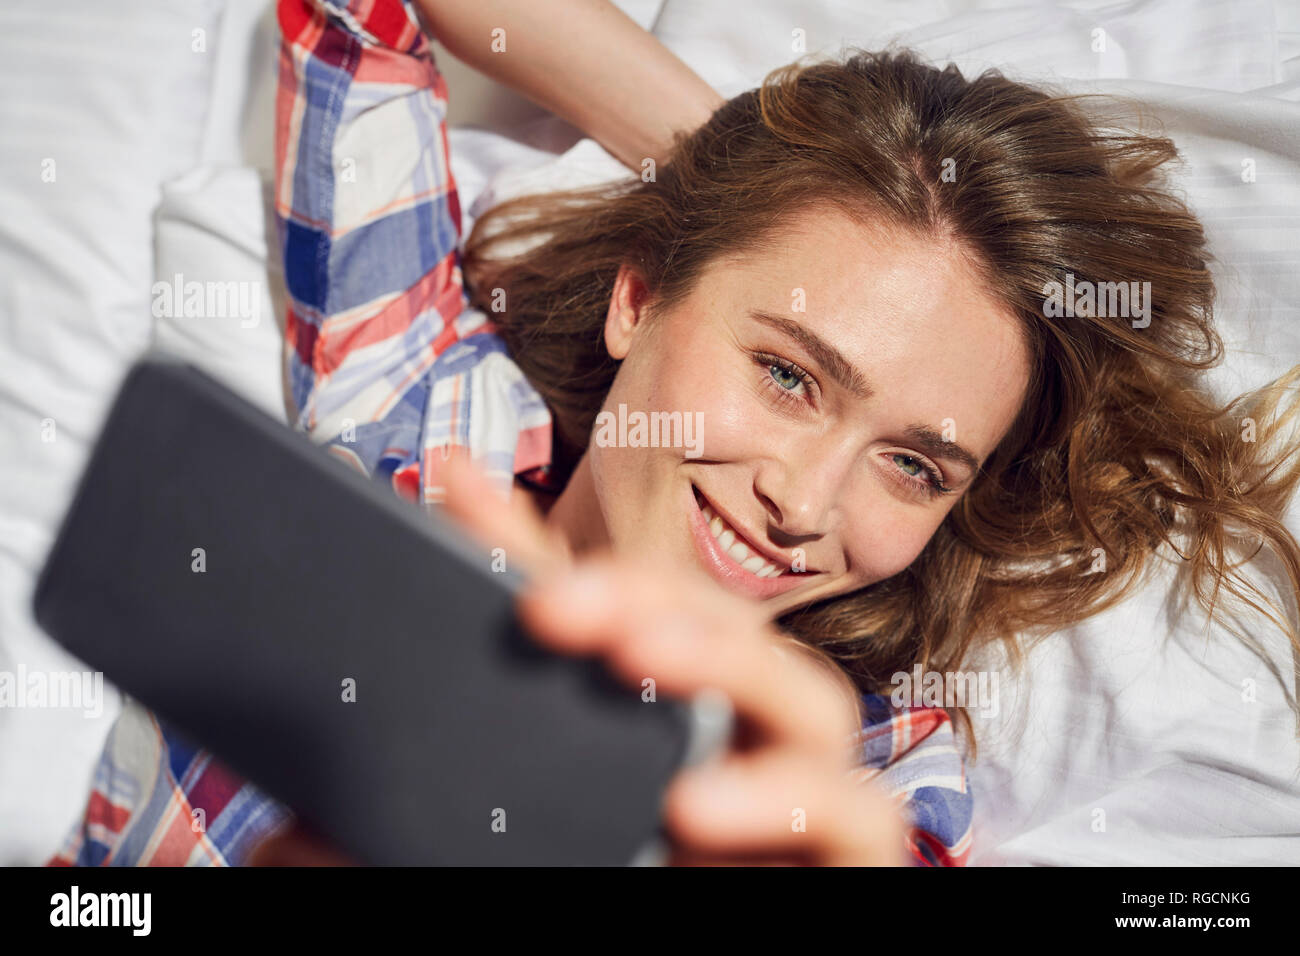 Portrait of laughing woman lying on bed taking selfie with smartphone Stock Photo